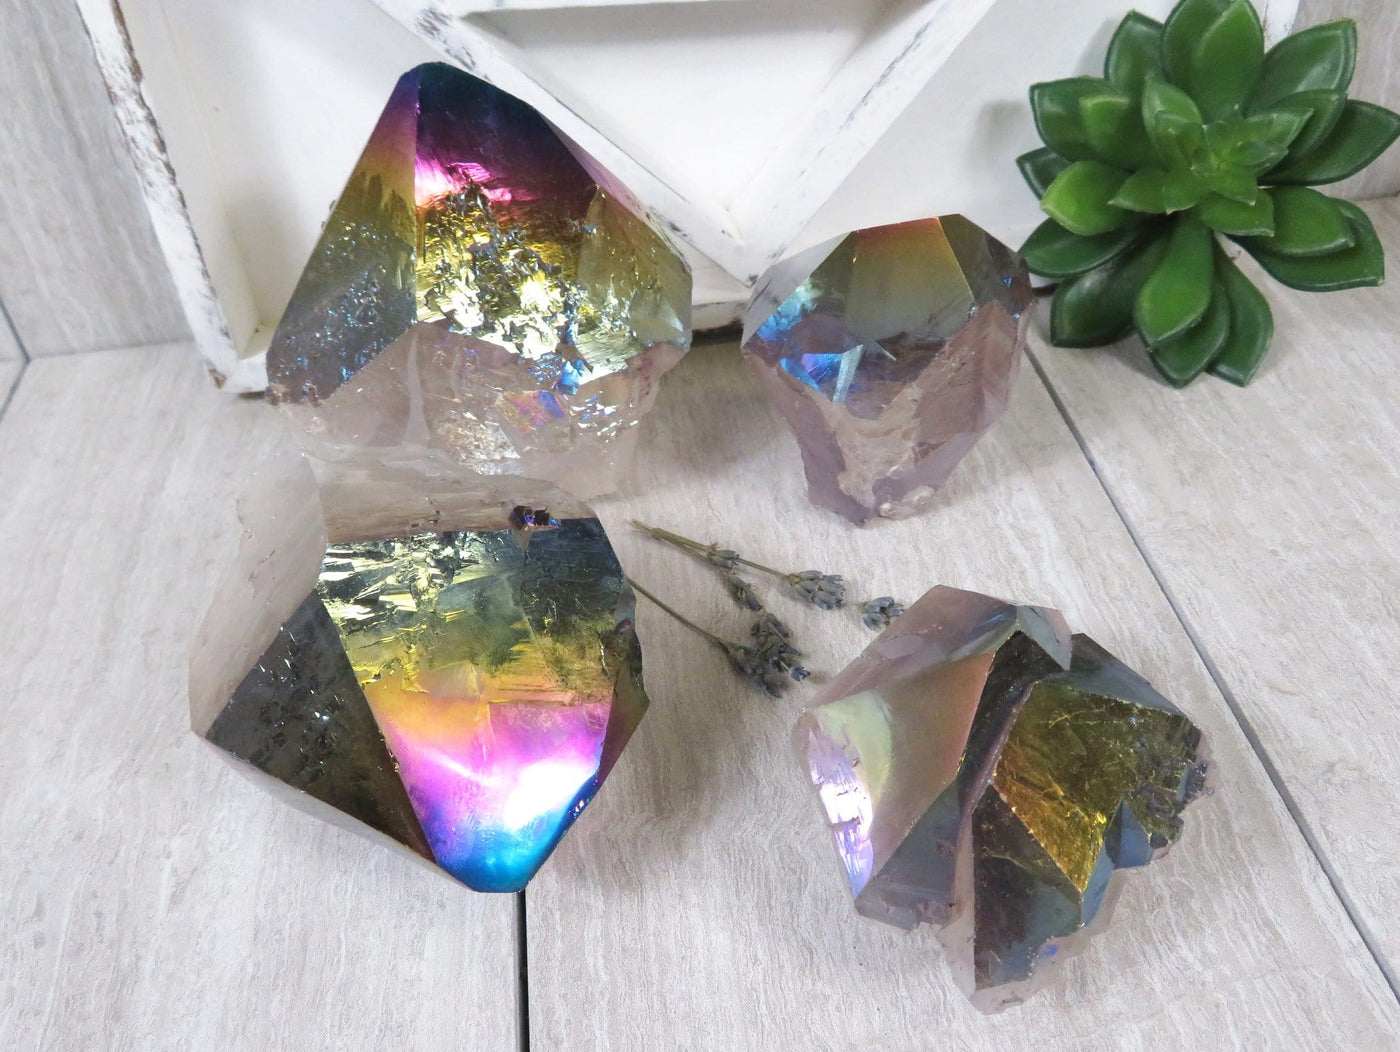 4 Rainbow Titanium Coated Crystal Points on wooden table with decorations in the background